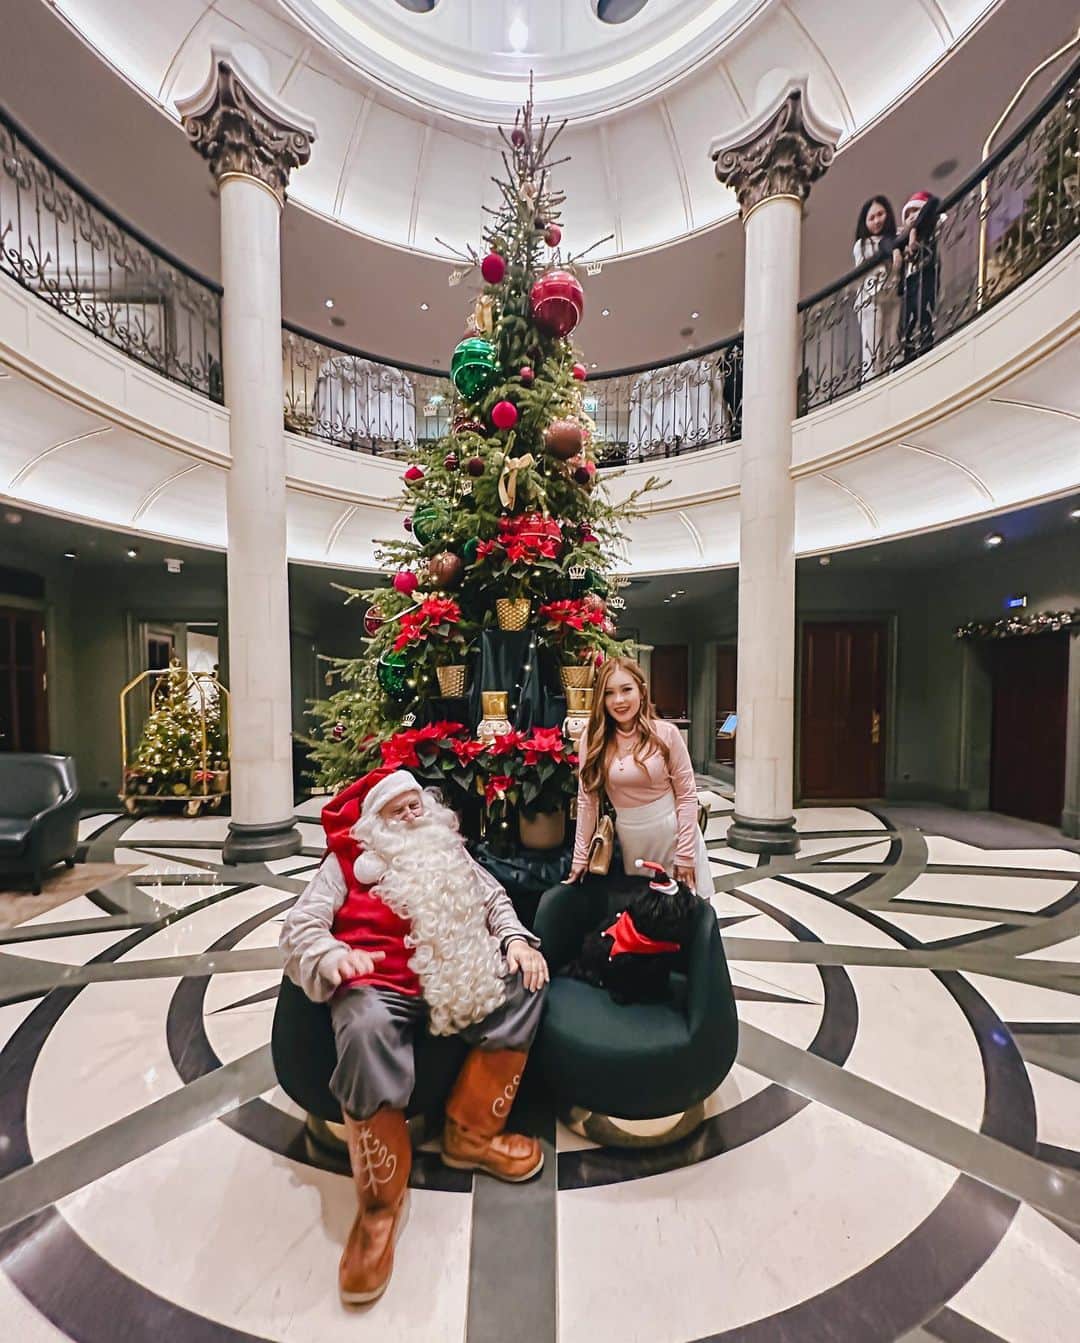 Stella Leeのインスタグラム：「Everyone’s favorite grandpa in December 🎅❄️🎄 Staying at beautiful @kamphotel this season and they have Santa coming for Christmas 🇫🇮✨  Dear Santa, I want PS5 and a Doraemon please 🫣🫣🫣 How about you? What do you wish for?」